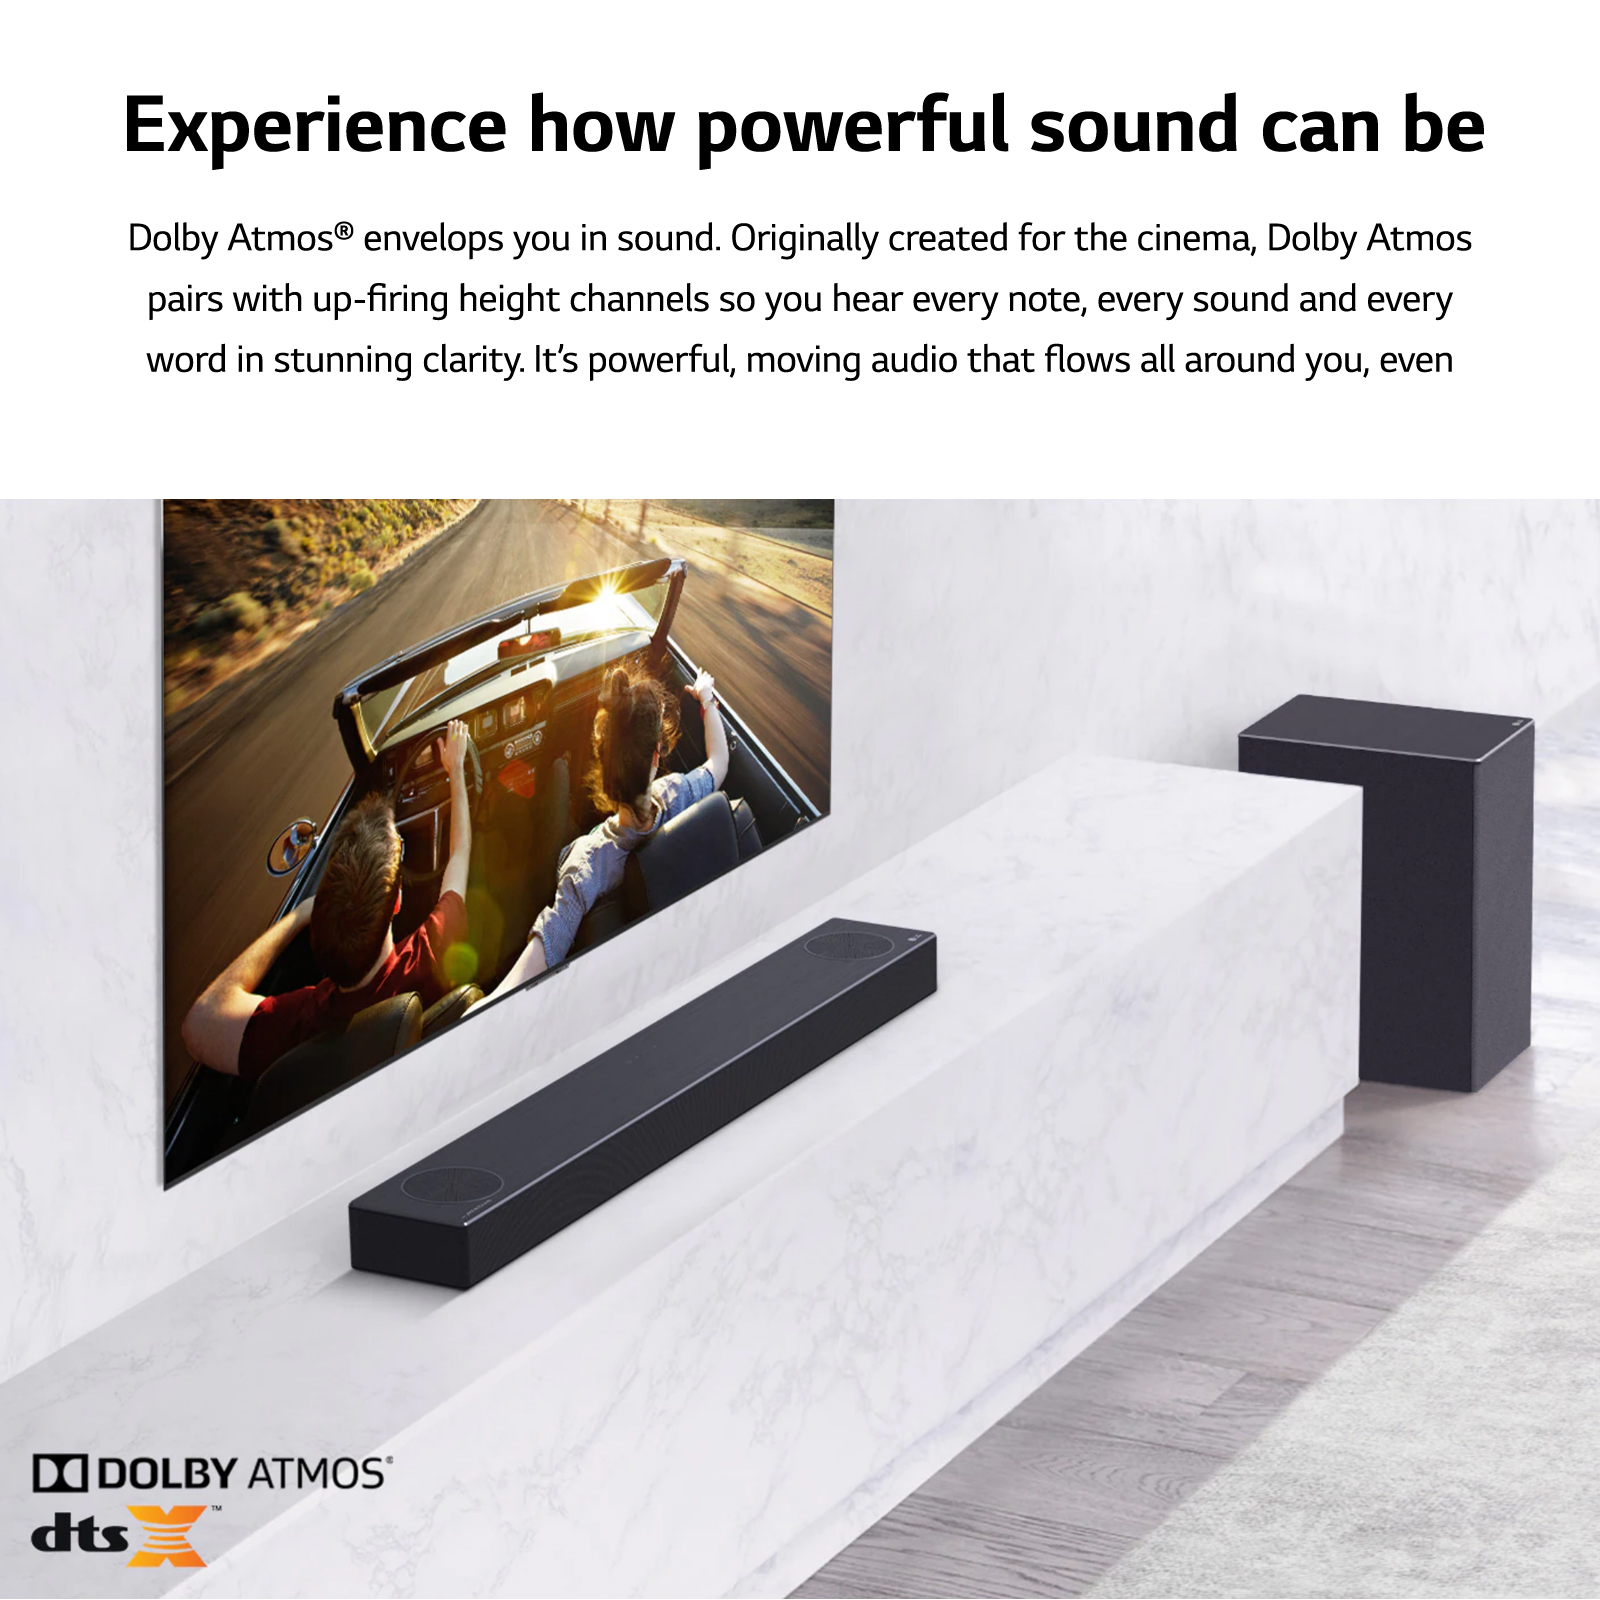 LG 3.1.2 Channel High Res Audio Soundbar with Dolby Atmos and 4K Pass-Through, SPM7A - image 2 of 12